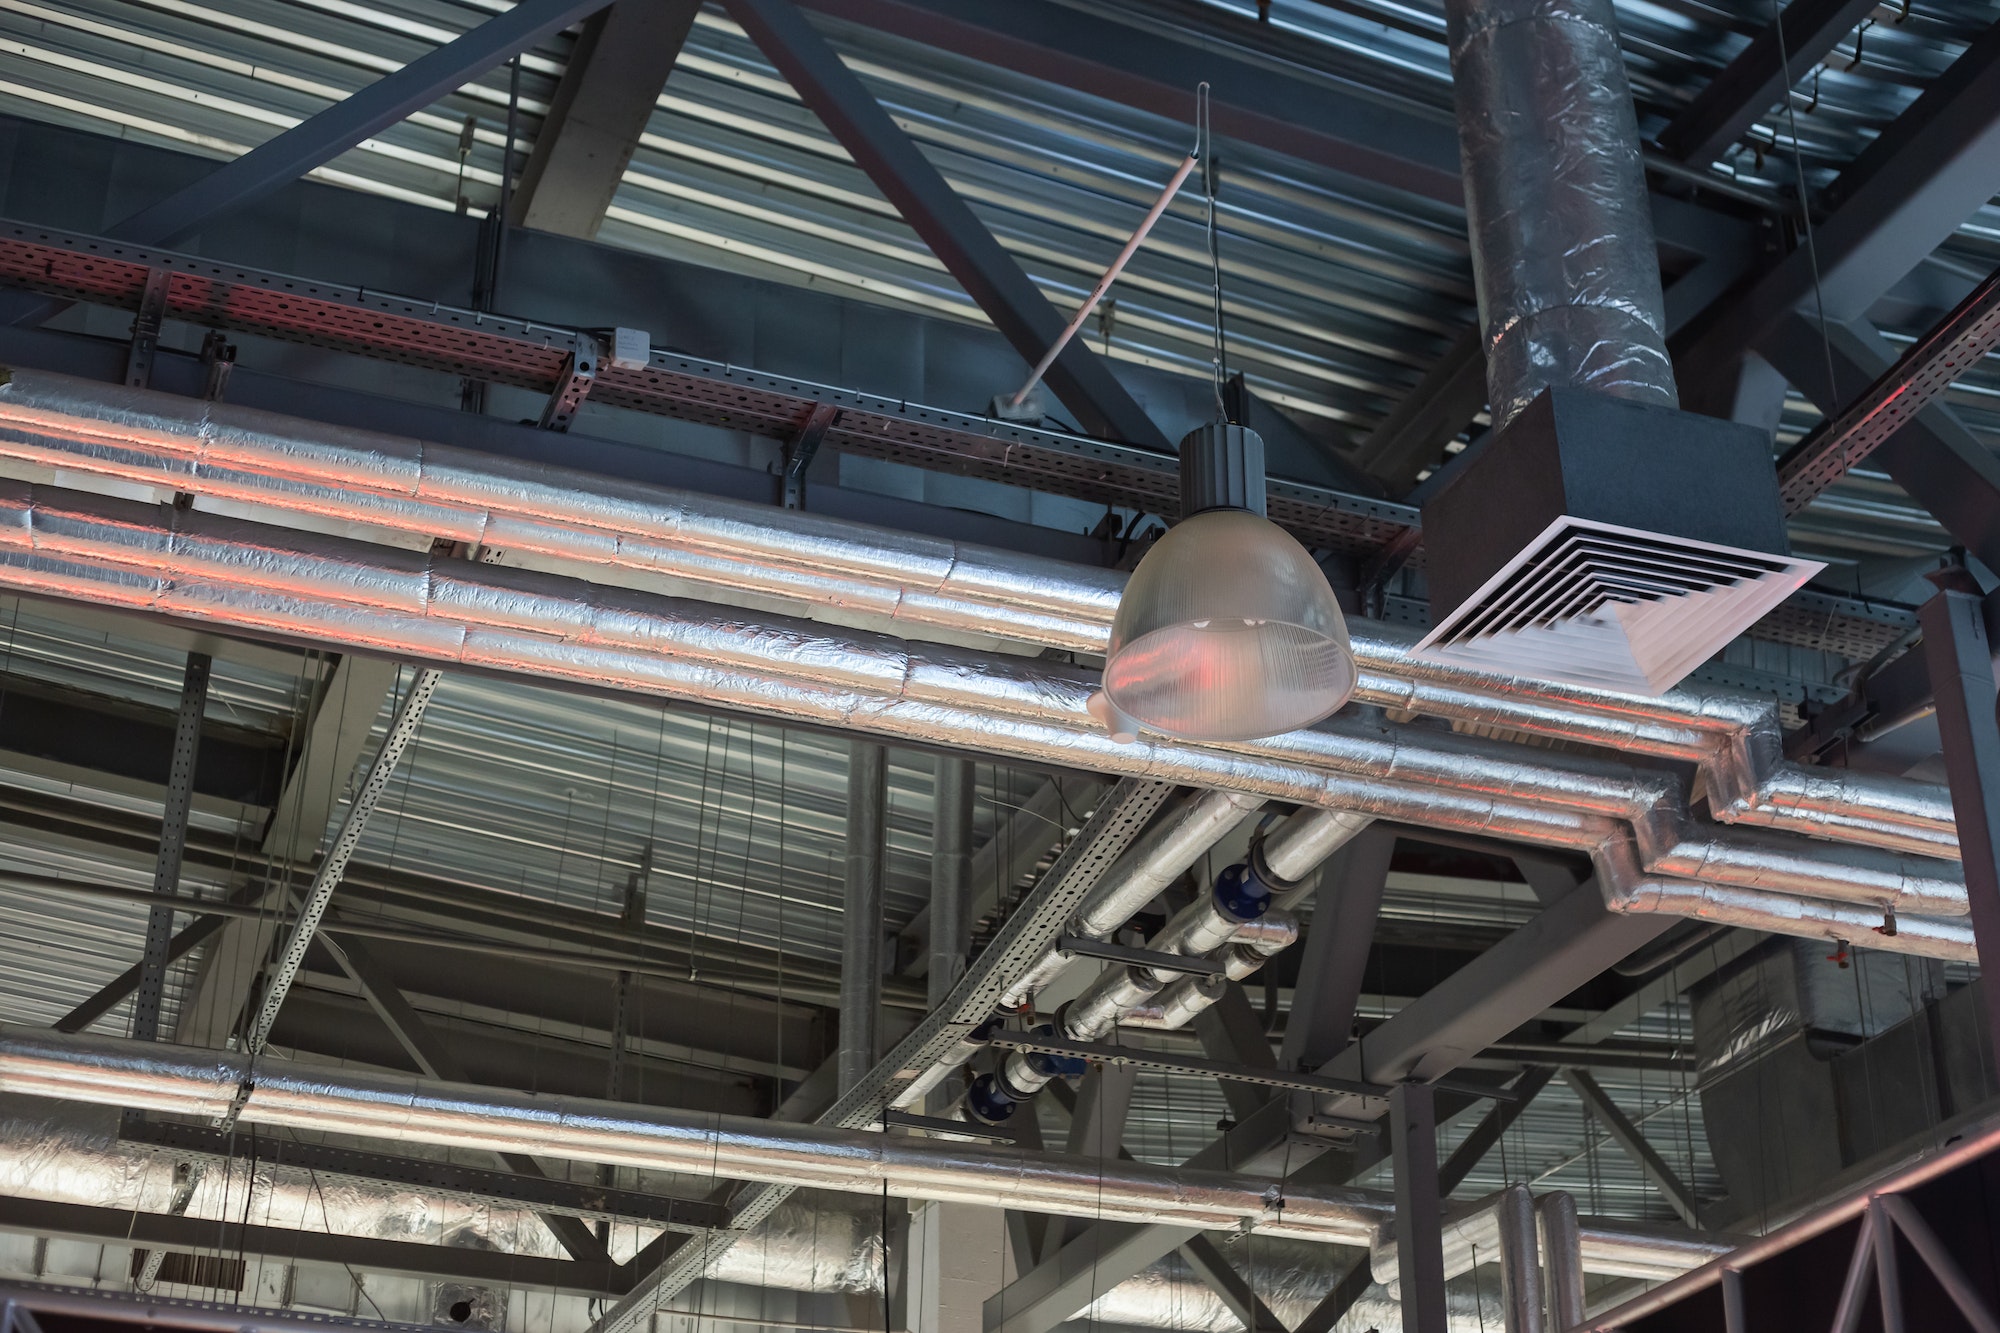 Supply grille for industrial ventilation in an office building under the ceiling, hvac